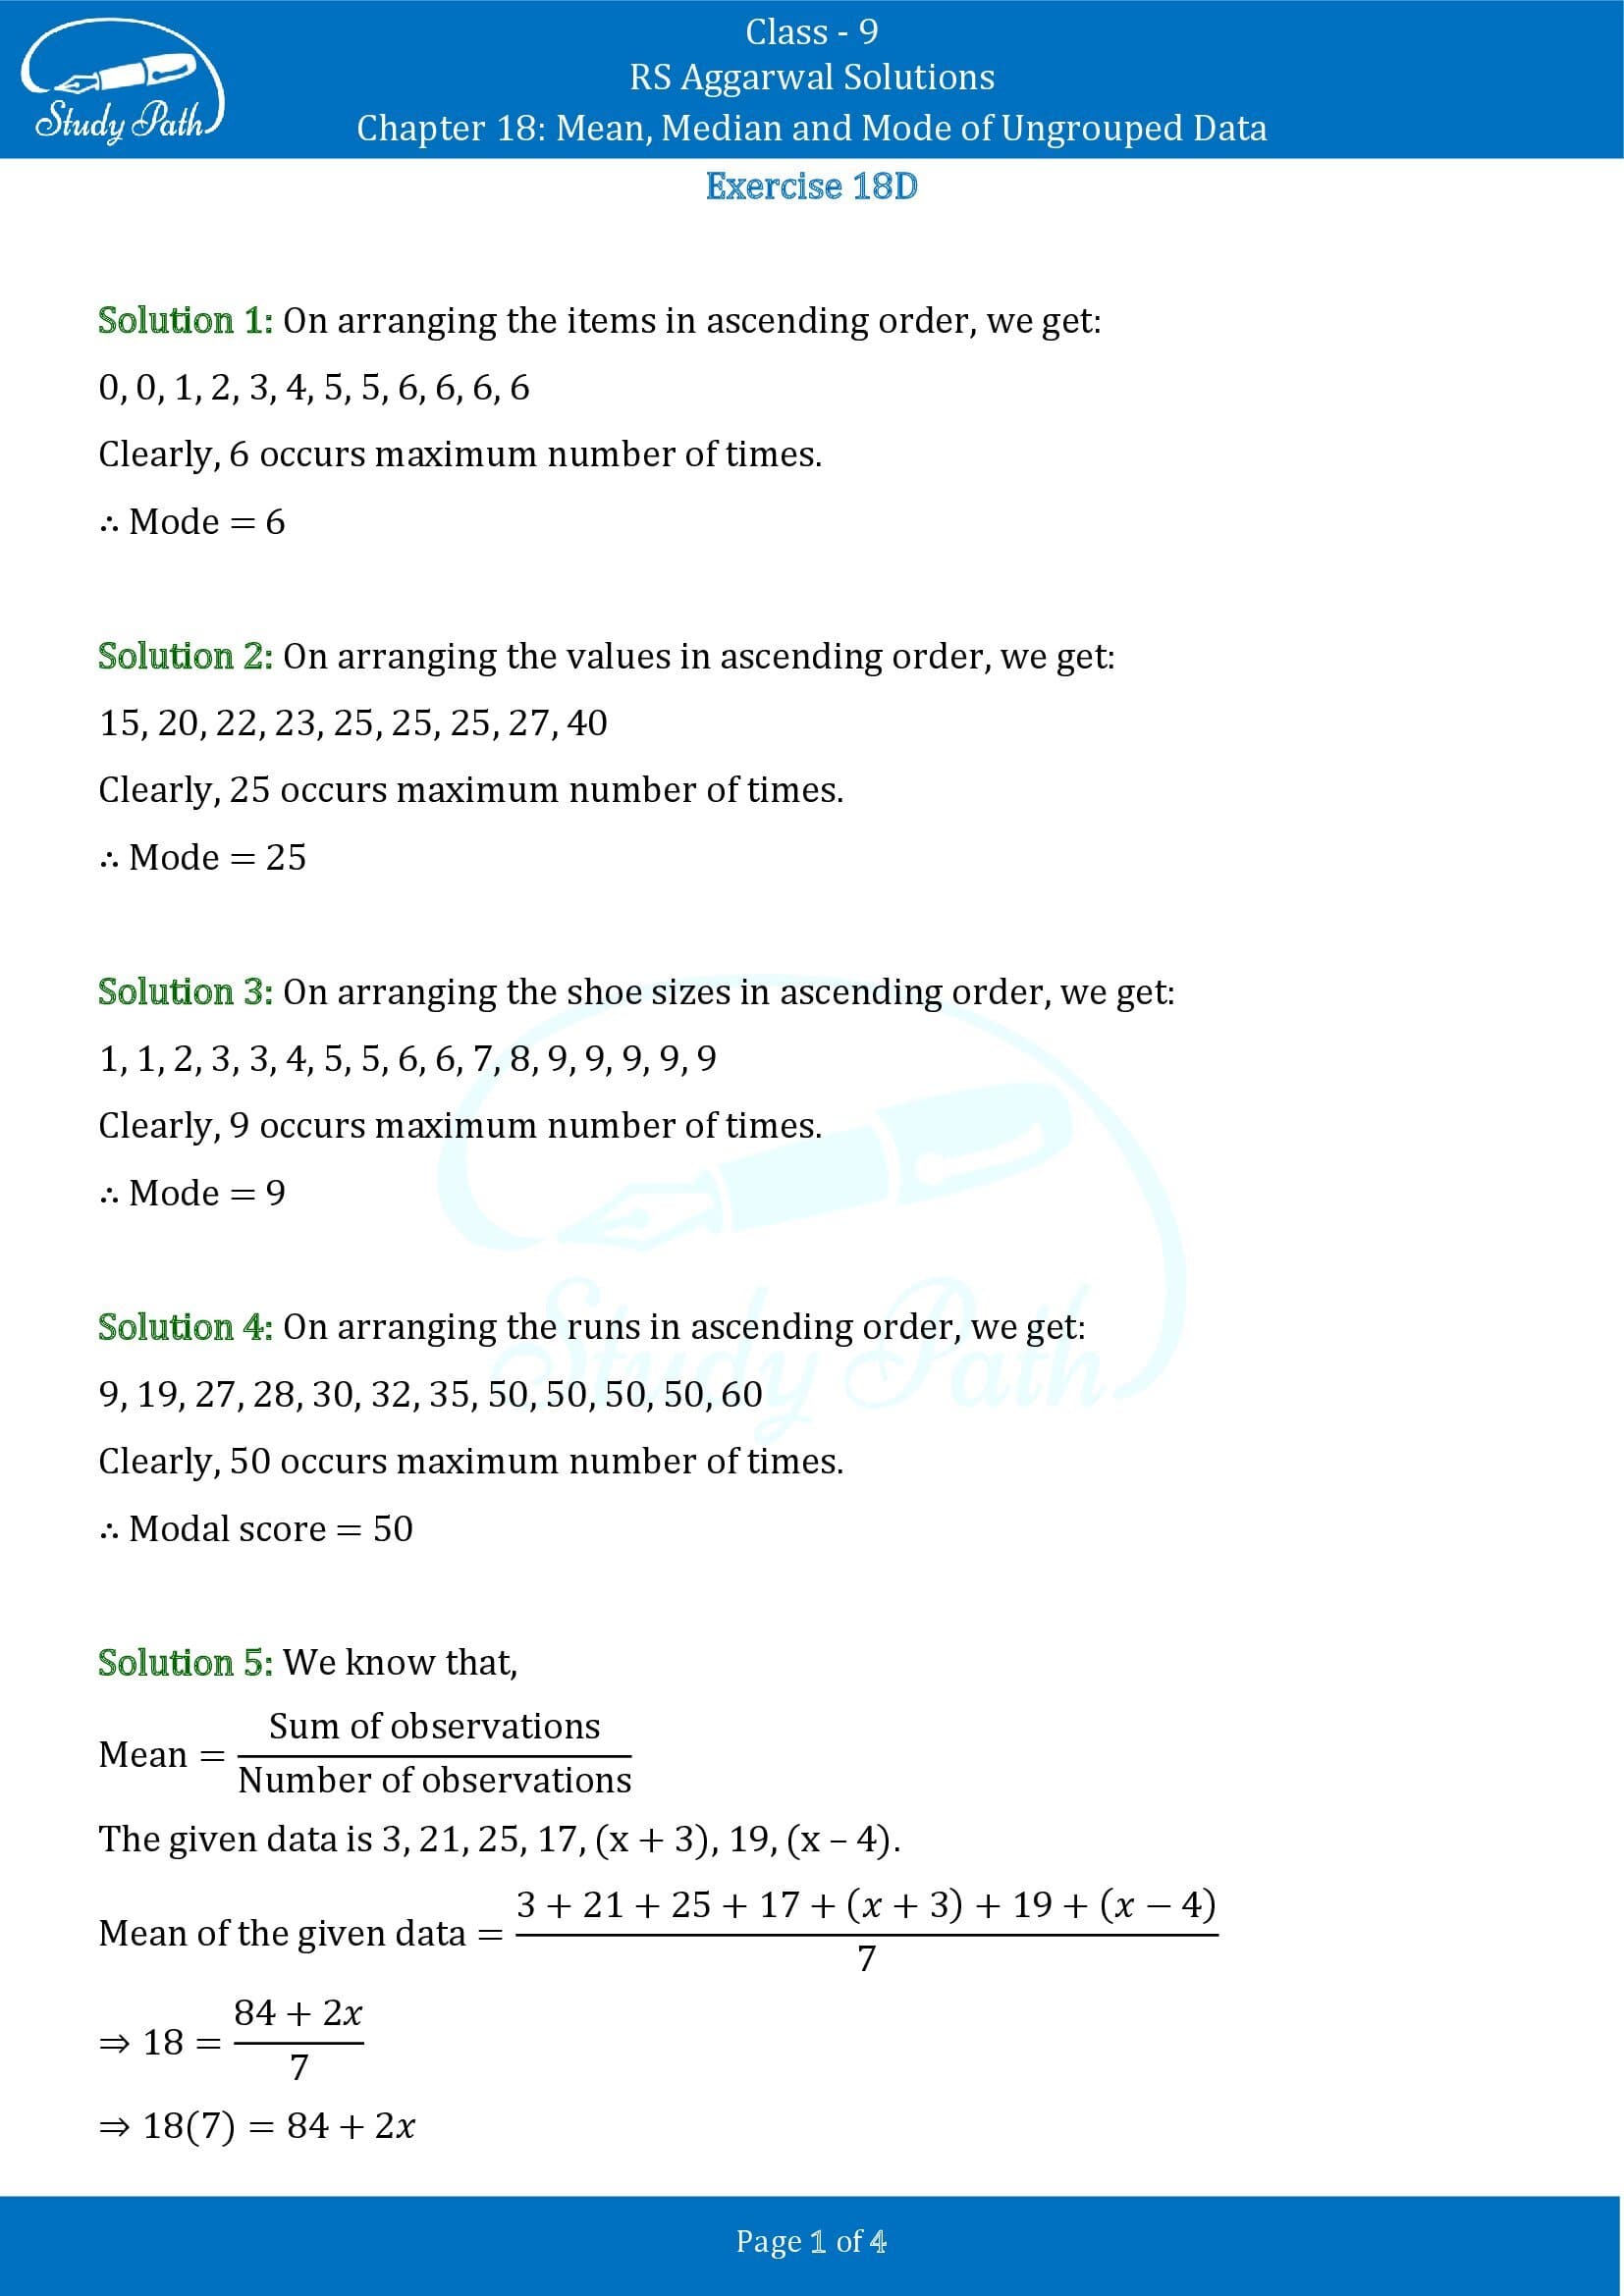 RS Aggarwal Solutions Class 9 Chapter 18 Mean Median and Mode of Ungrouped Data Exercise 18D 00001